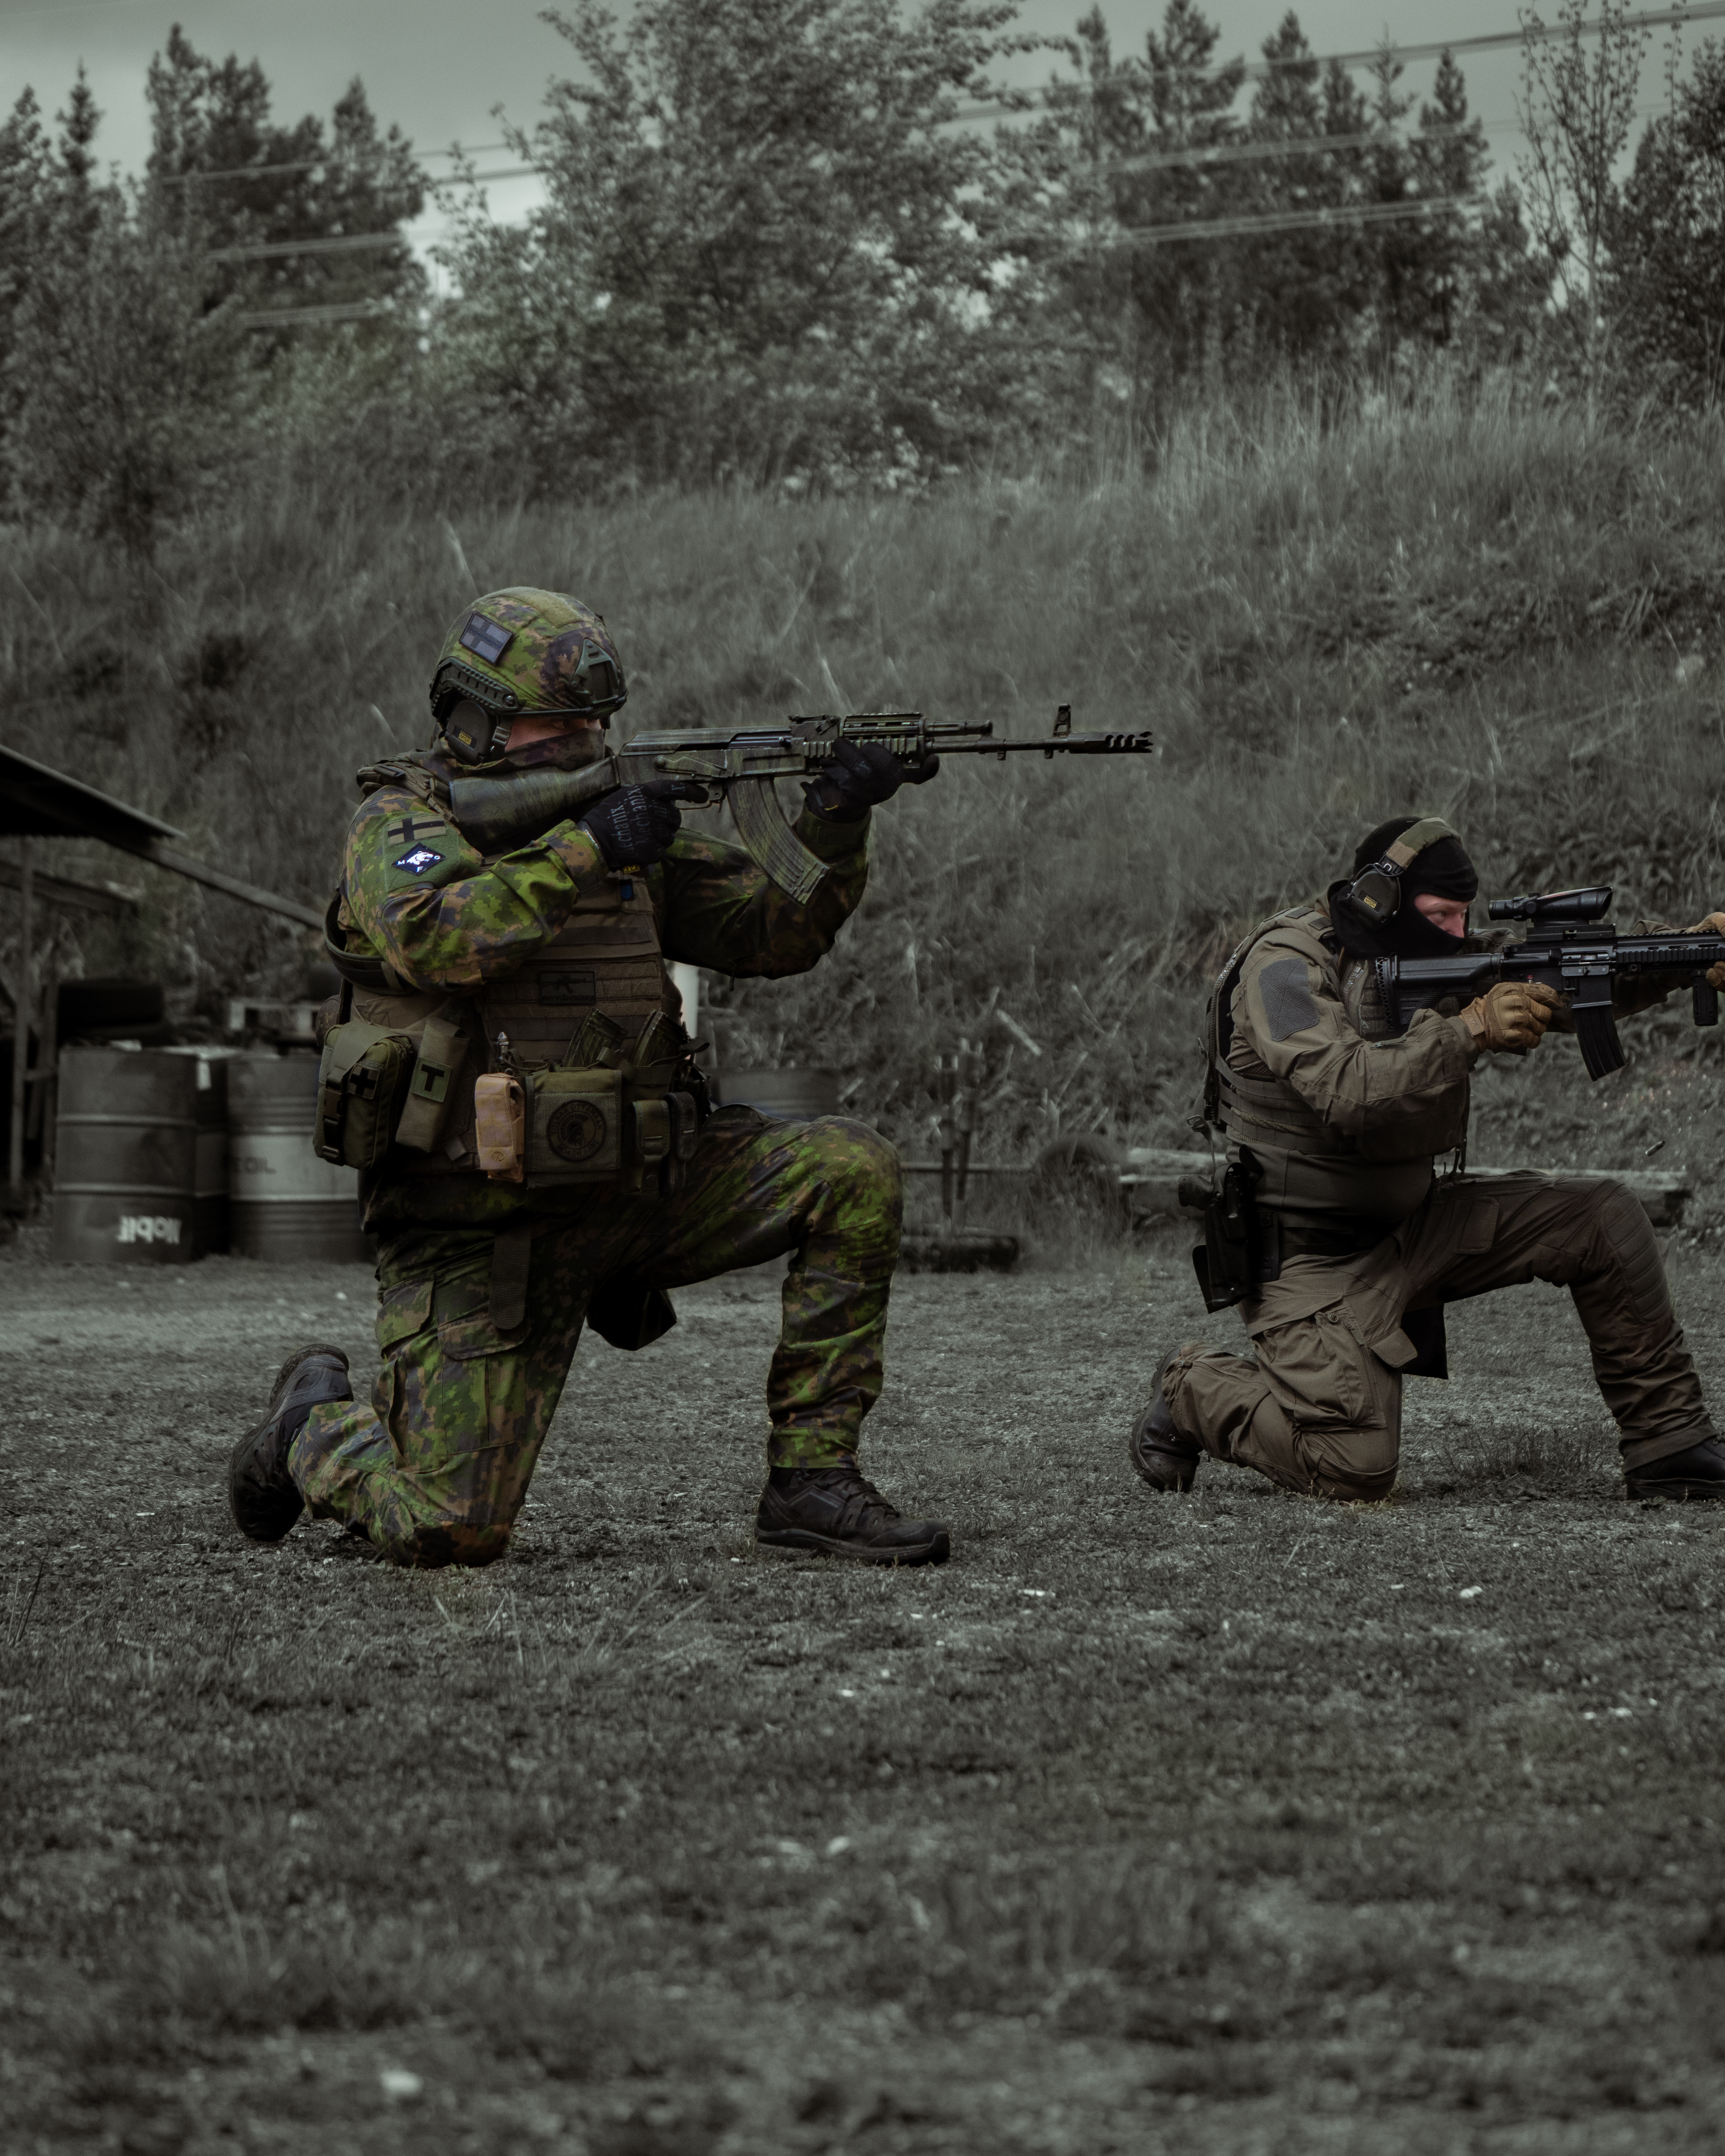 Two men with rifles in a high knee stance are shooting on a shooting range. One of men has a ak47 rifle, he is wearing a M05 camo jacket, M05 camo pants, a plate carrier, boots and a protection group denmark pgd ballistic helmet. The other man is wearing a balaclava, earpro, a uf pro combat shirt, uf pro tactical pants, boots and a gun belt. He has a M4 AR15 Heckler & Koch 416 with a ACOG optic.  Finnish reservists